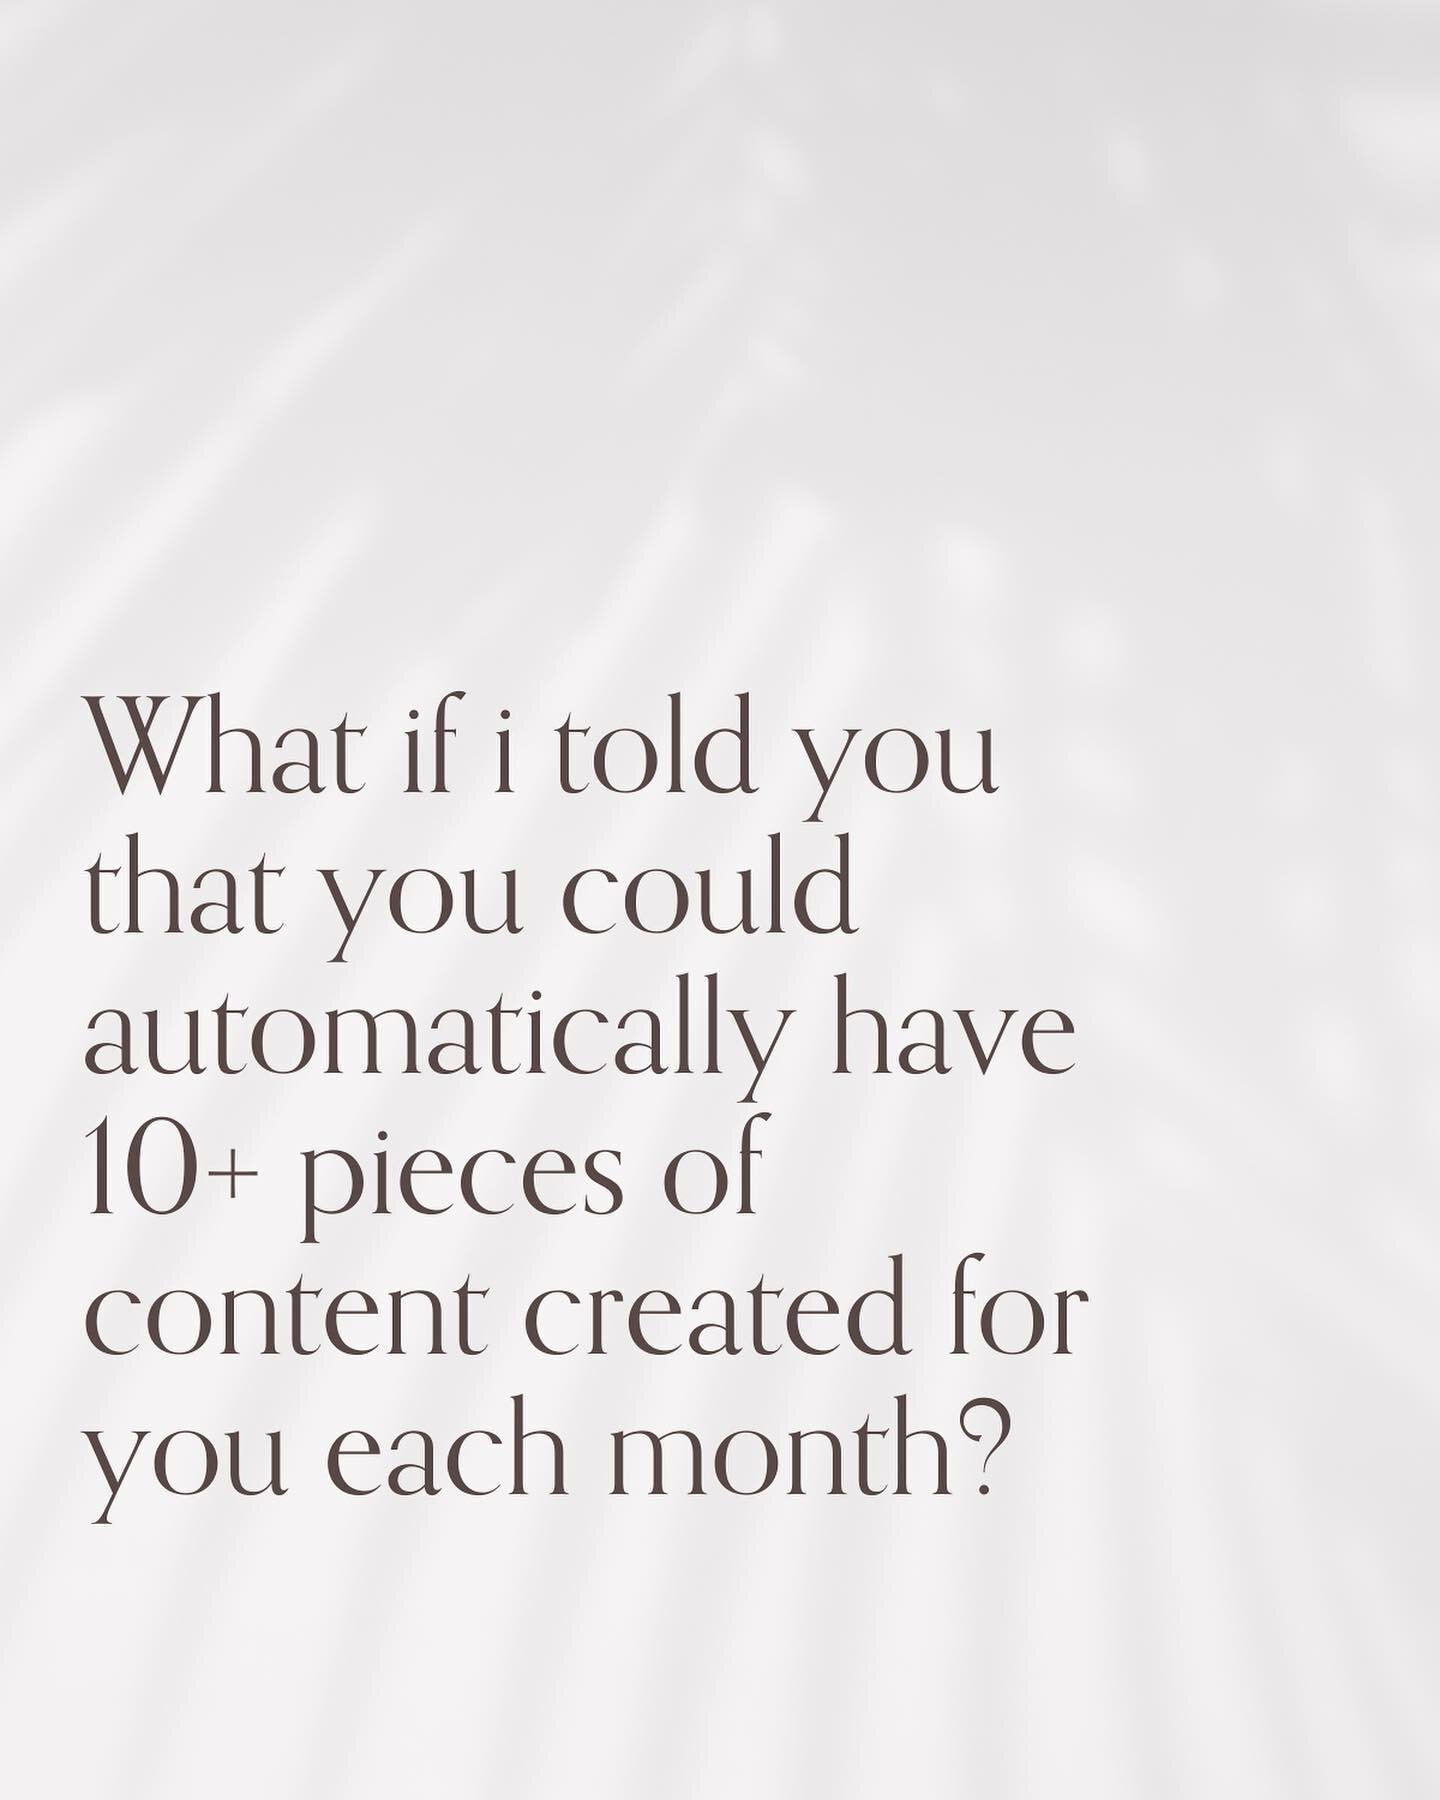 Have you ever thought about how much simpler your life would be if you could just automate your content creation process?

How would you feel if you were able to set up a streamlined content marketing system that grows and nurtures your audience each